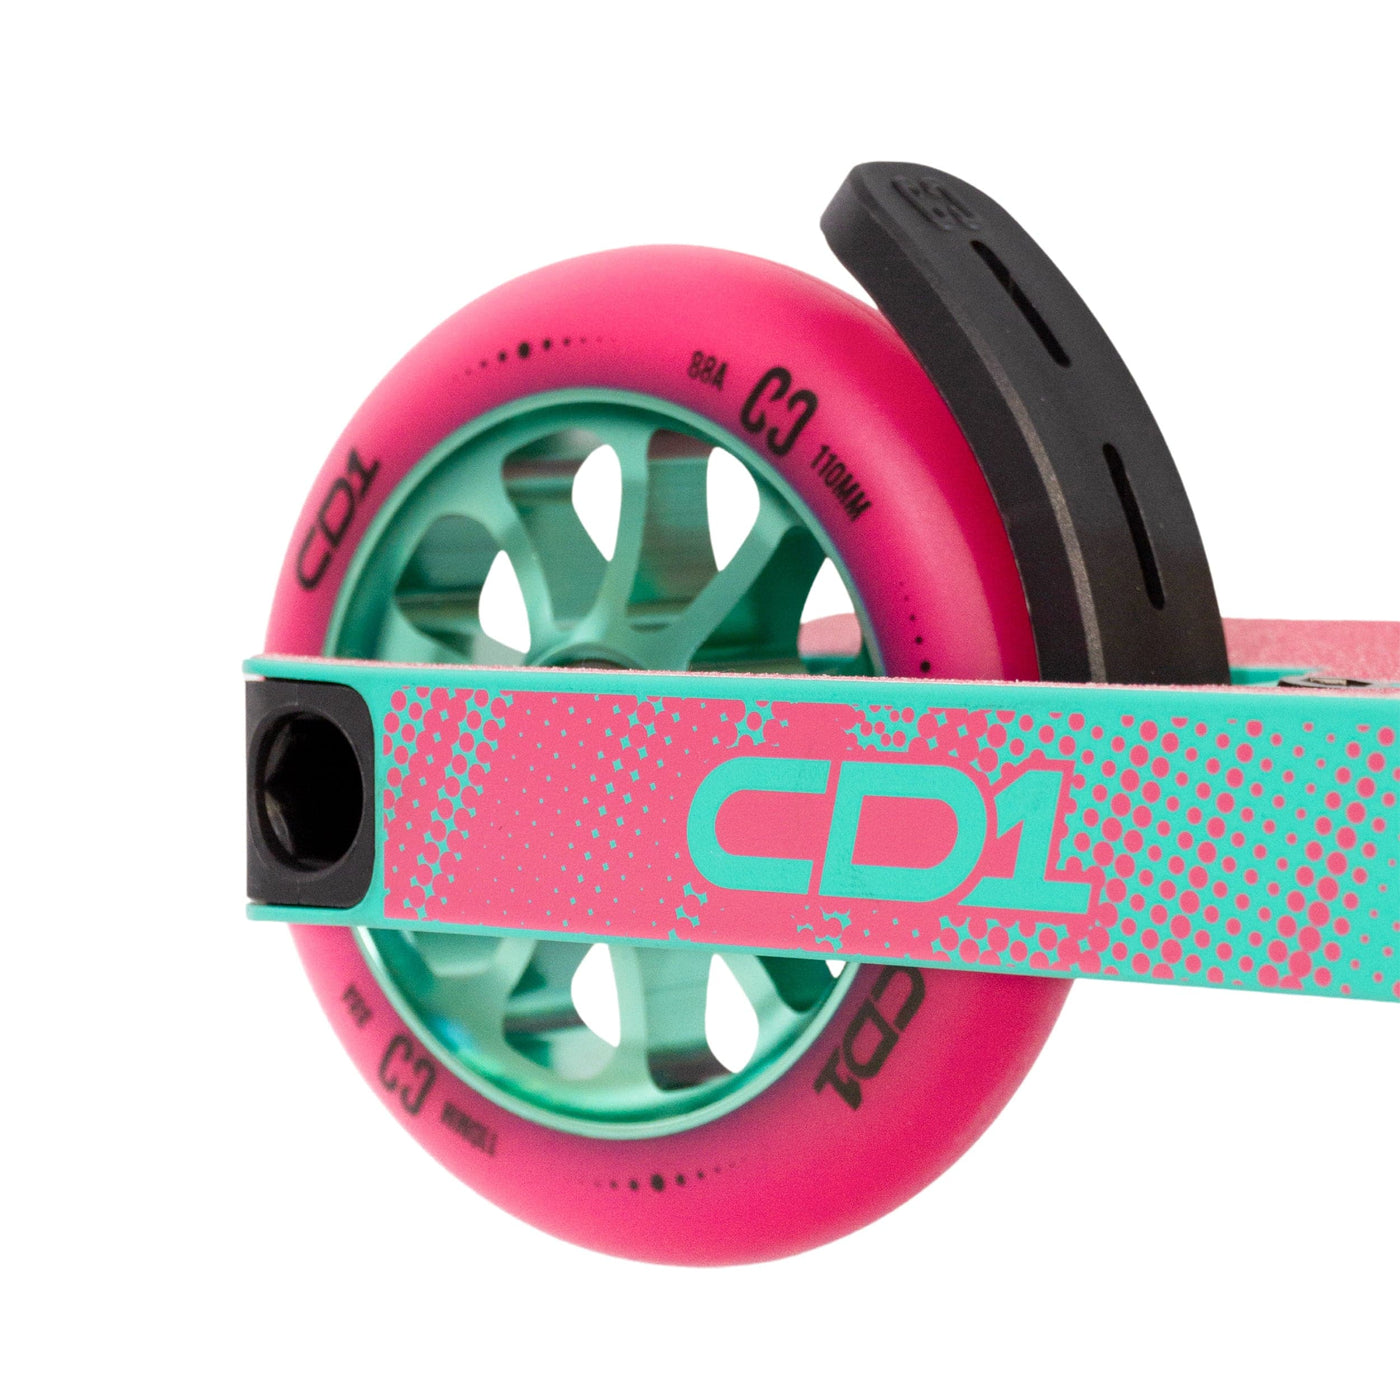 CORE CD1 Complete Stunt Scooter Teal & Pink I Adult Stunt Scooter Back Wheel